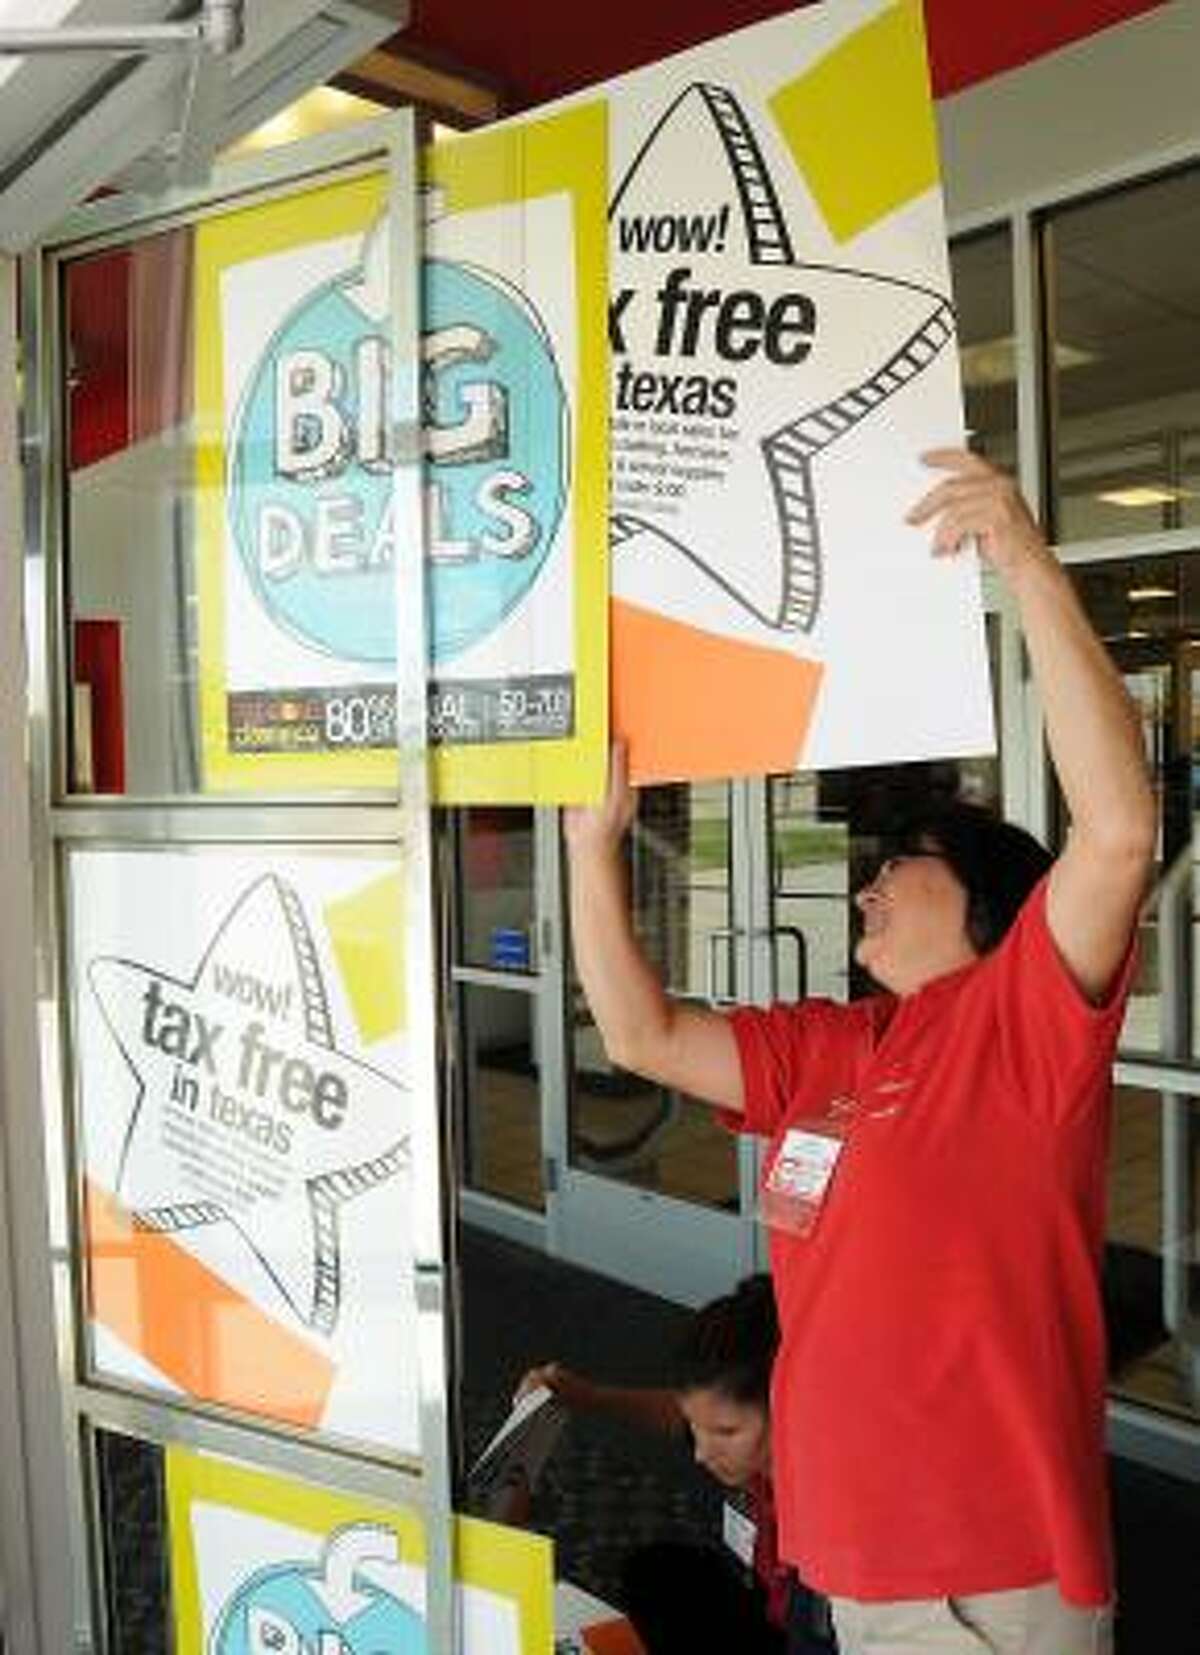 Fran Atchison posts a tax-free sign at the JC Penney in Katy.